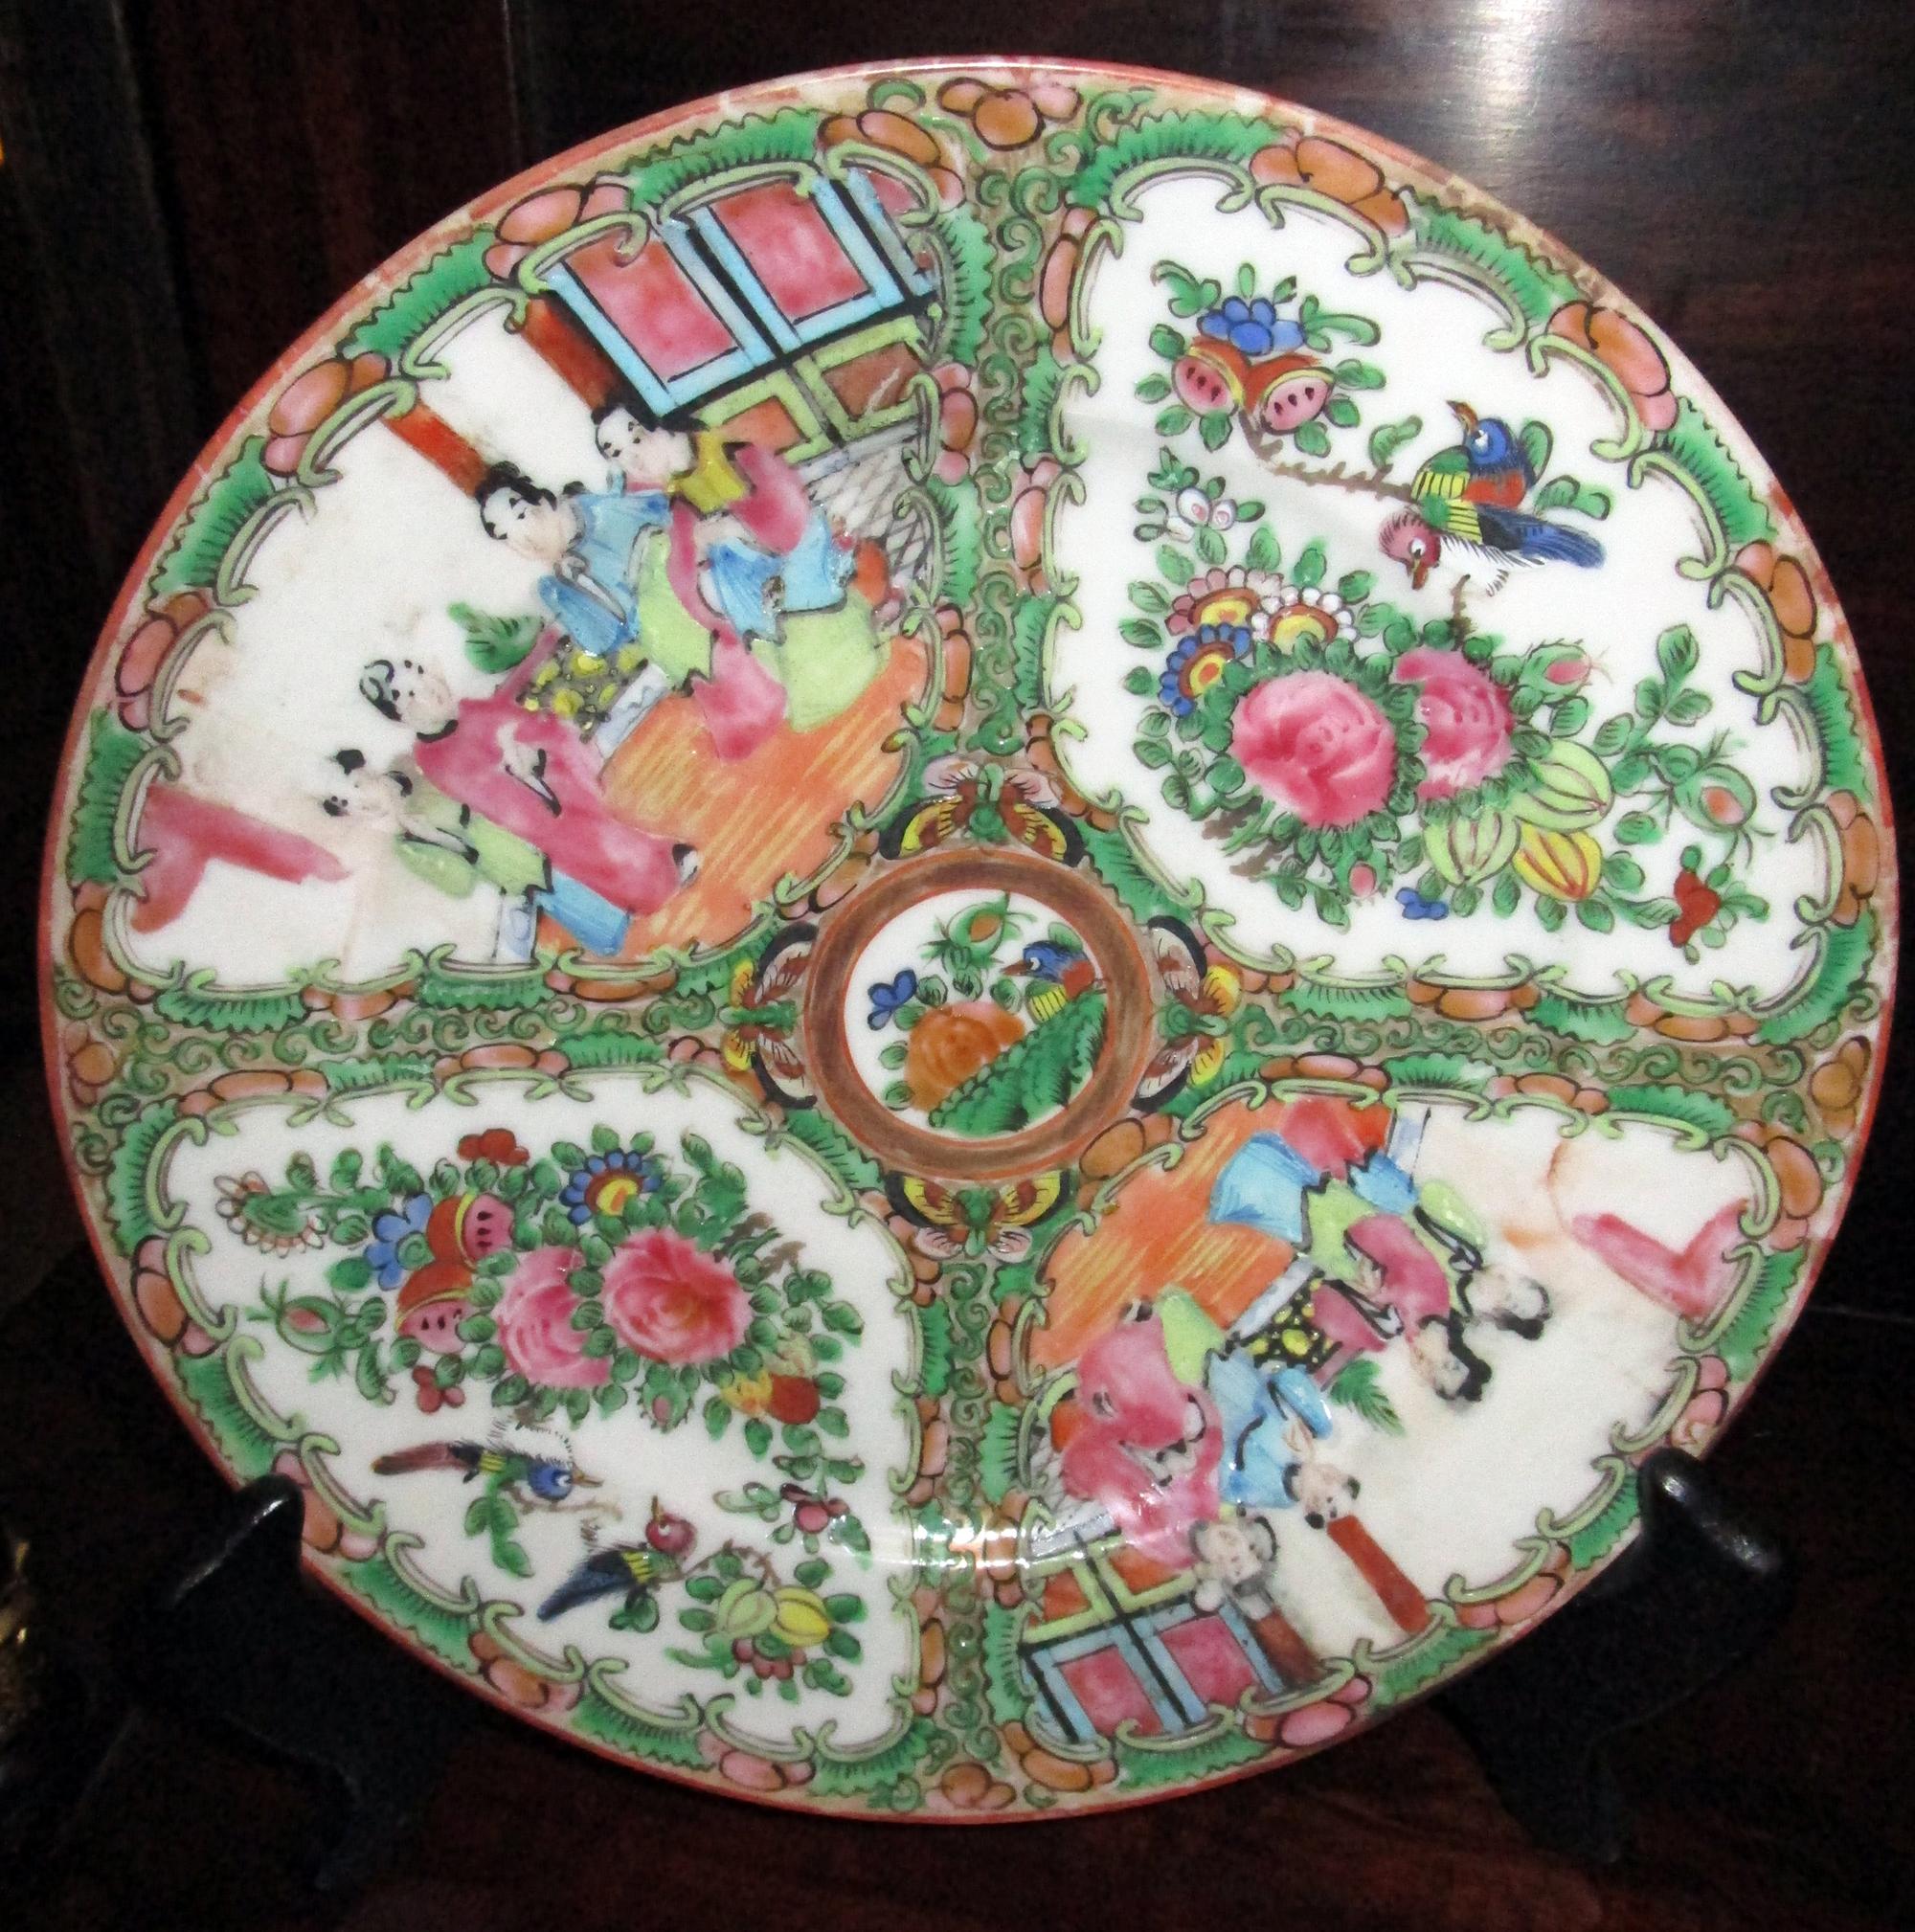 Painted 19th century Rose Medallion Chinese Export Plate Set of Four